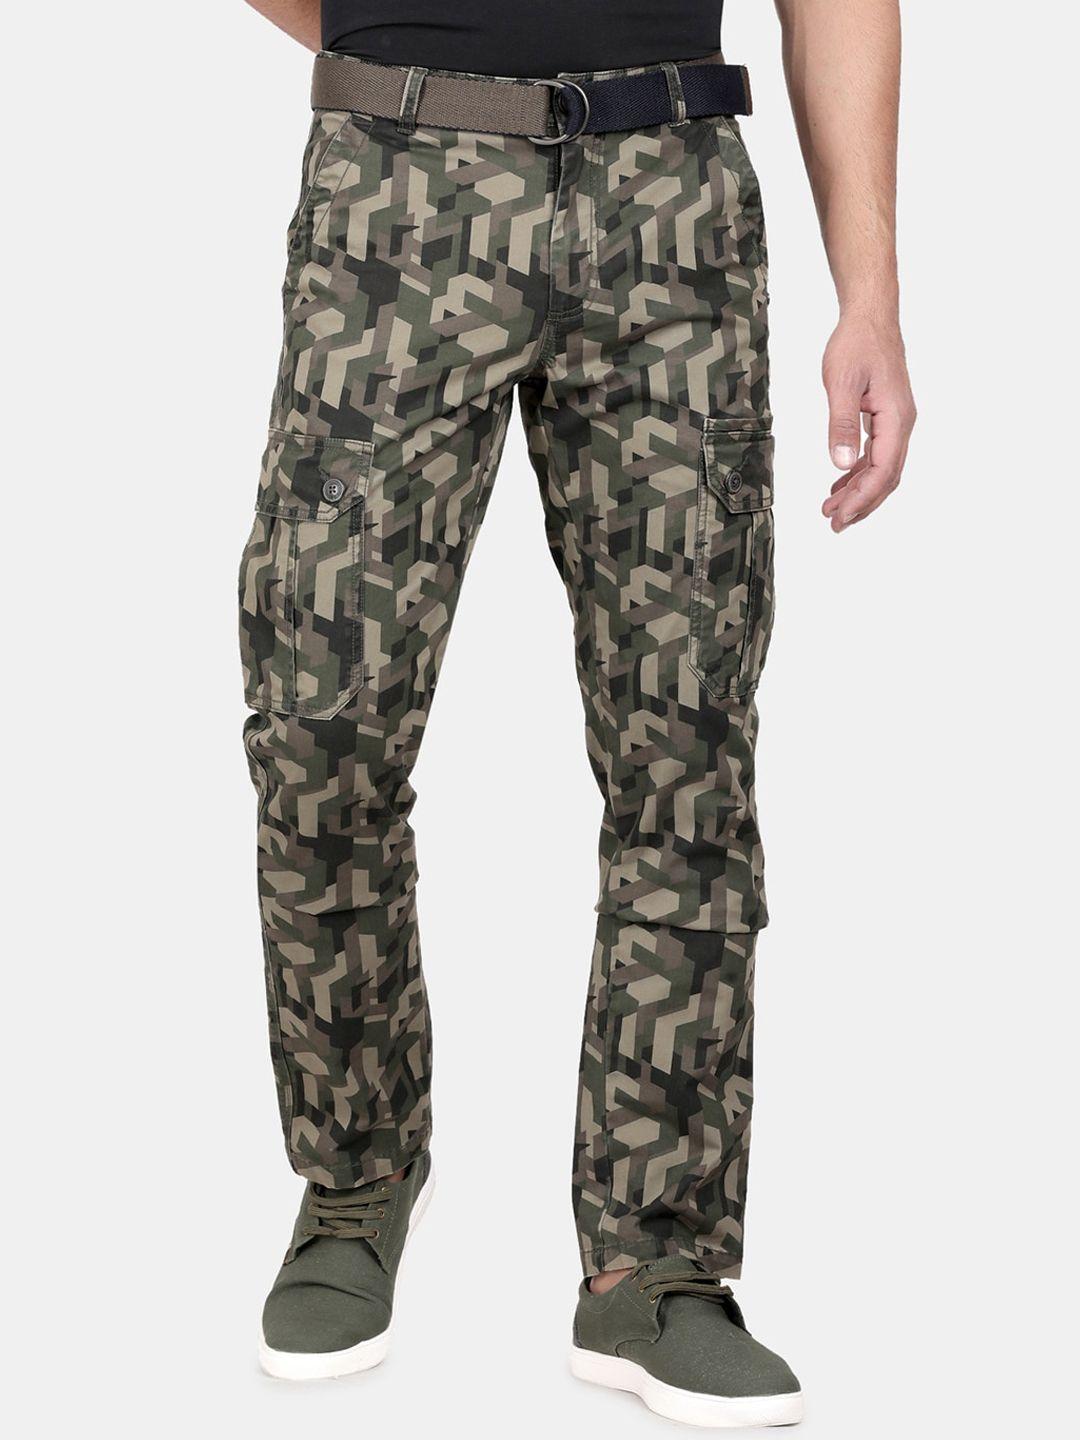 t-base-men-camouflage-printed-cotton-easy-wash-mid-rise-regular-fit-cargos-trousers